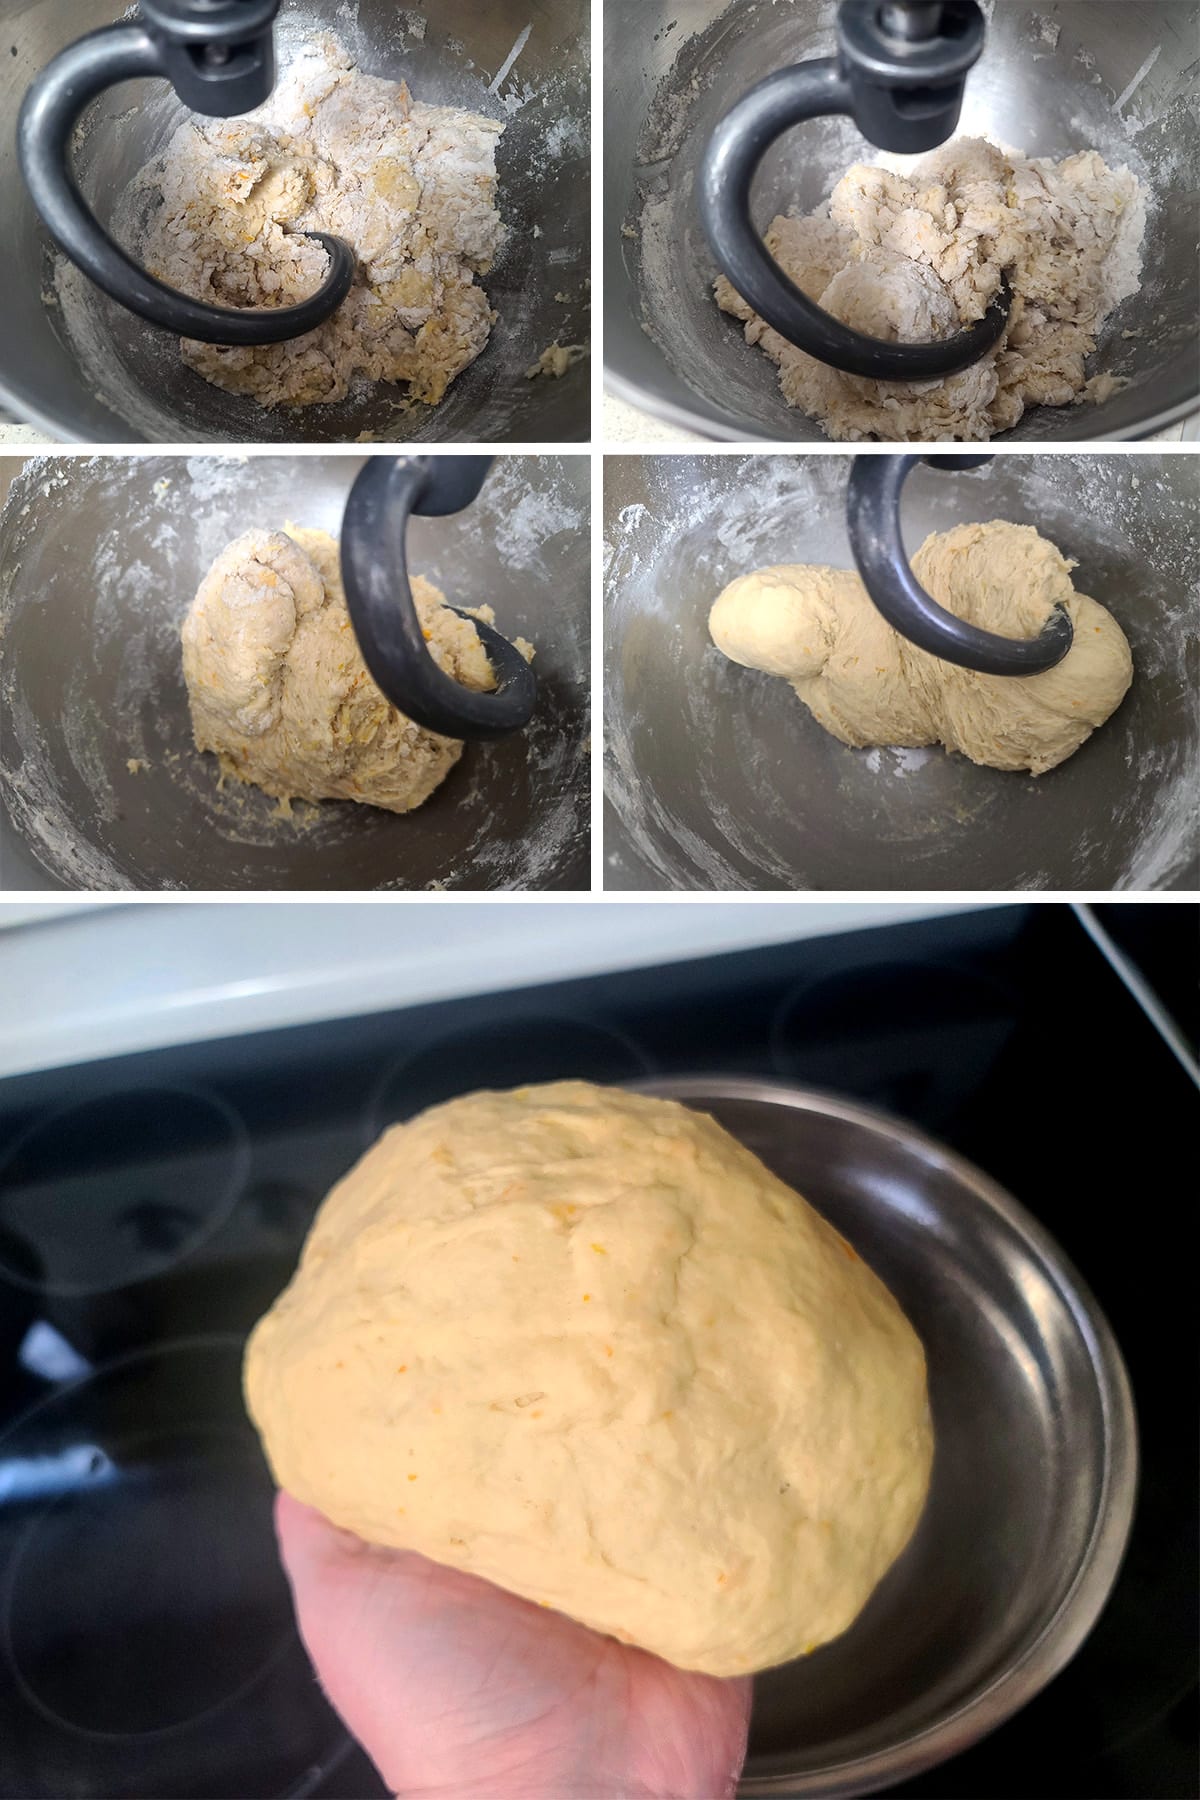 A 5 part image showing the dough being kneaded in a stand mixer, into a smooth ball.